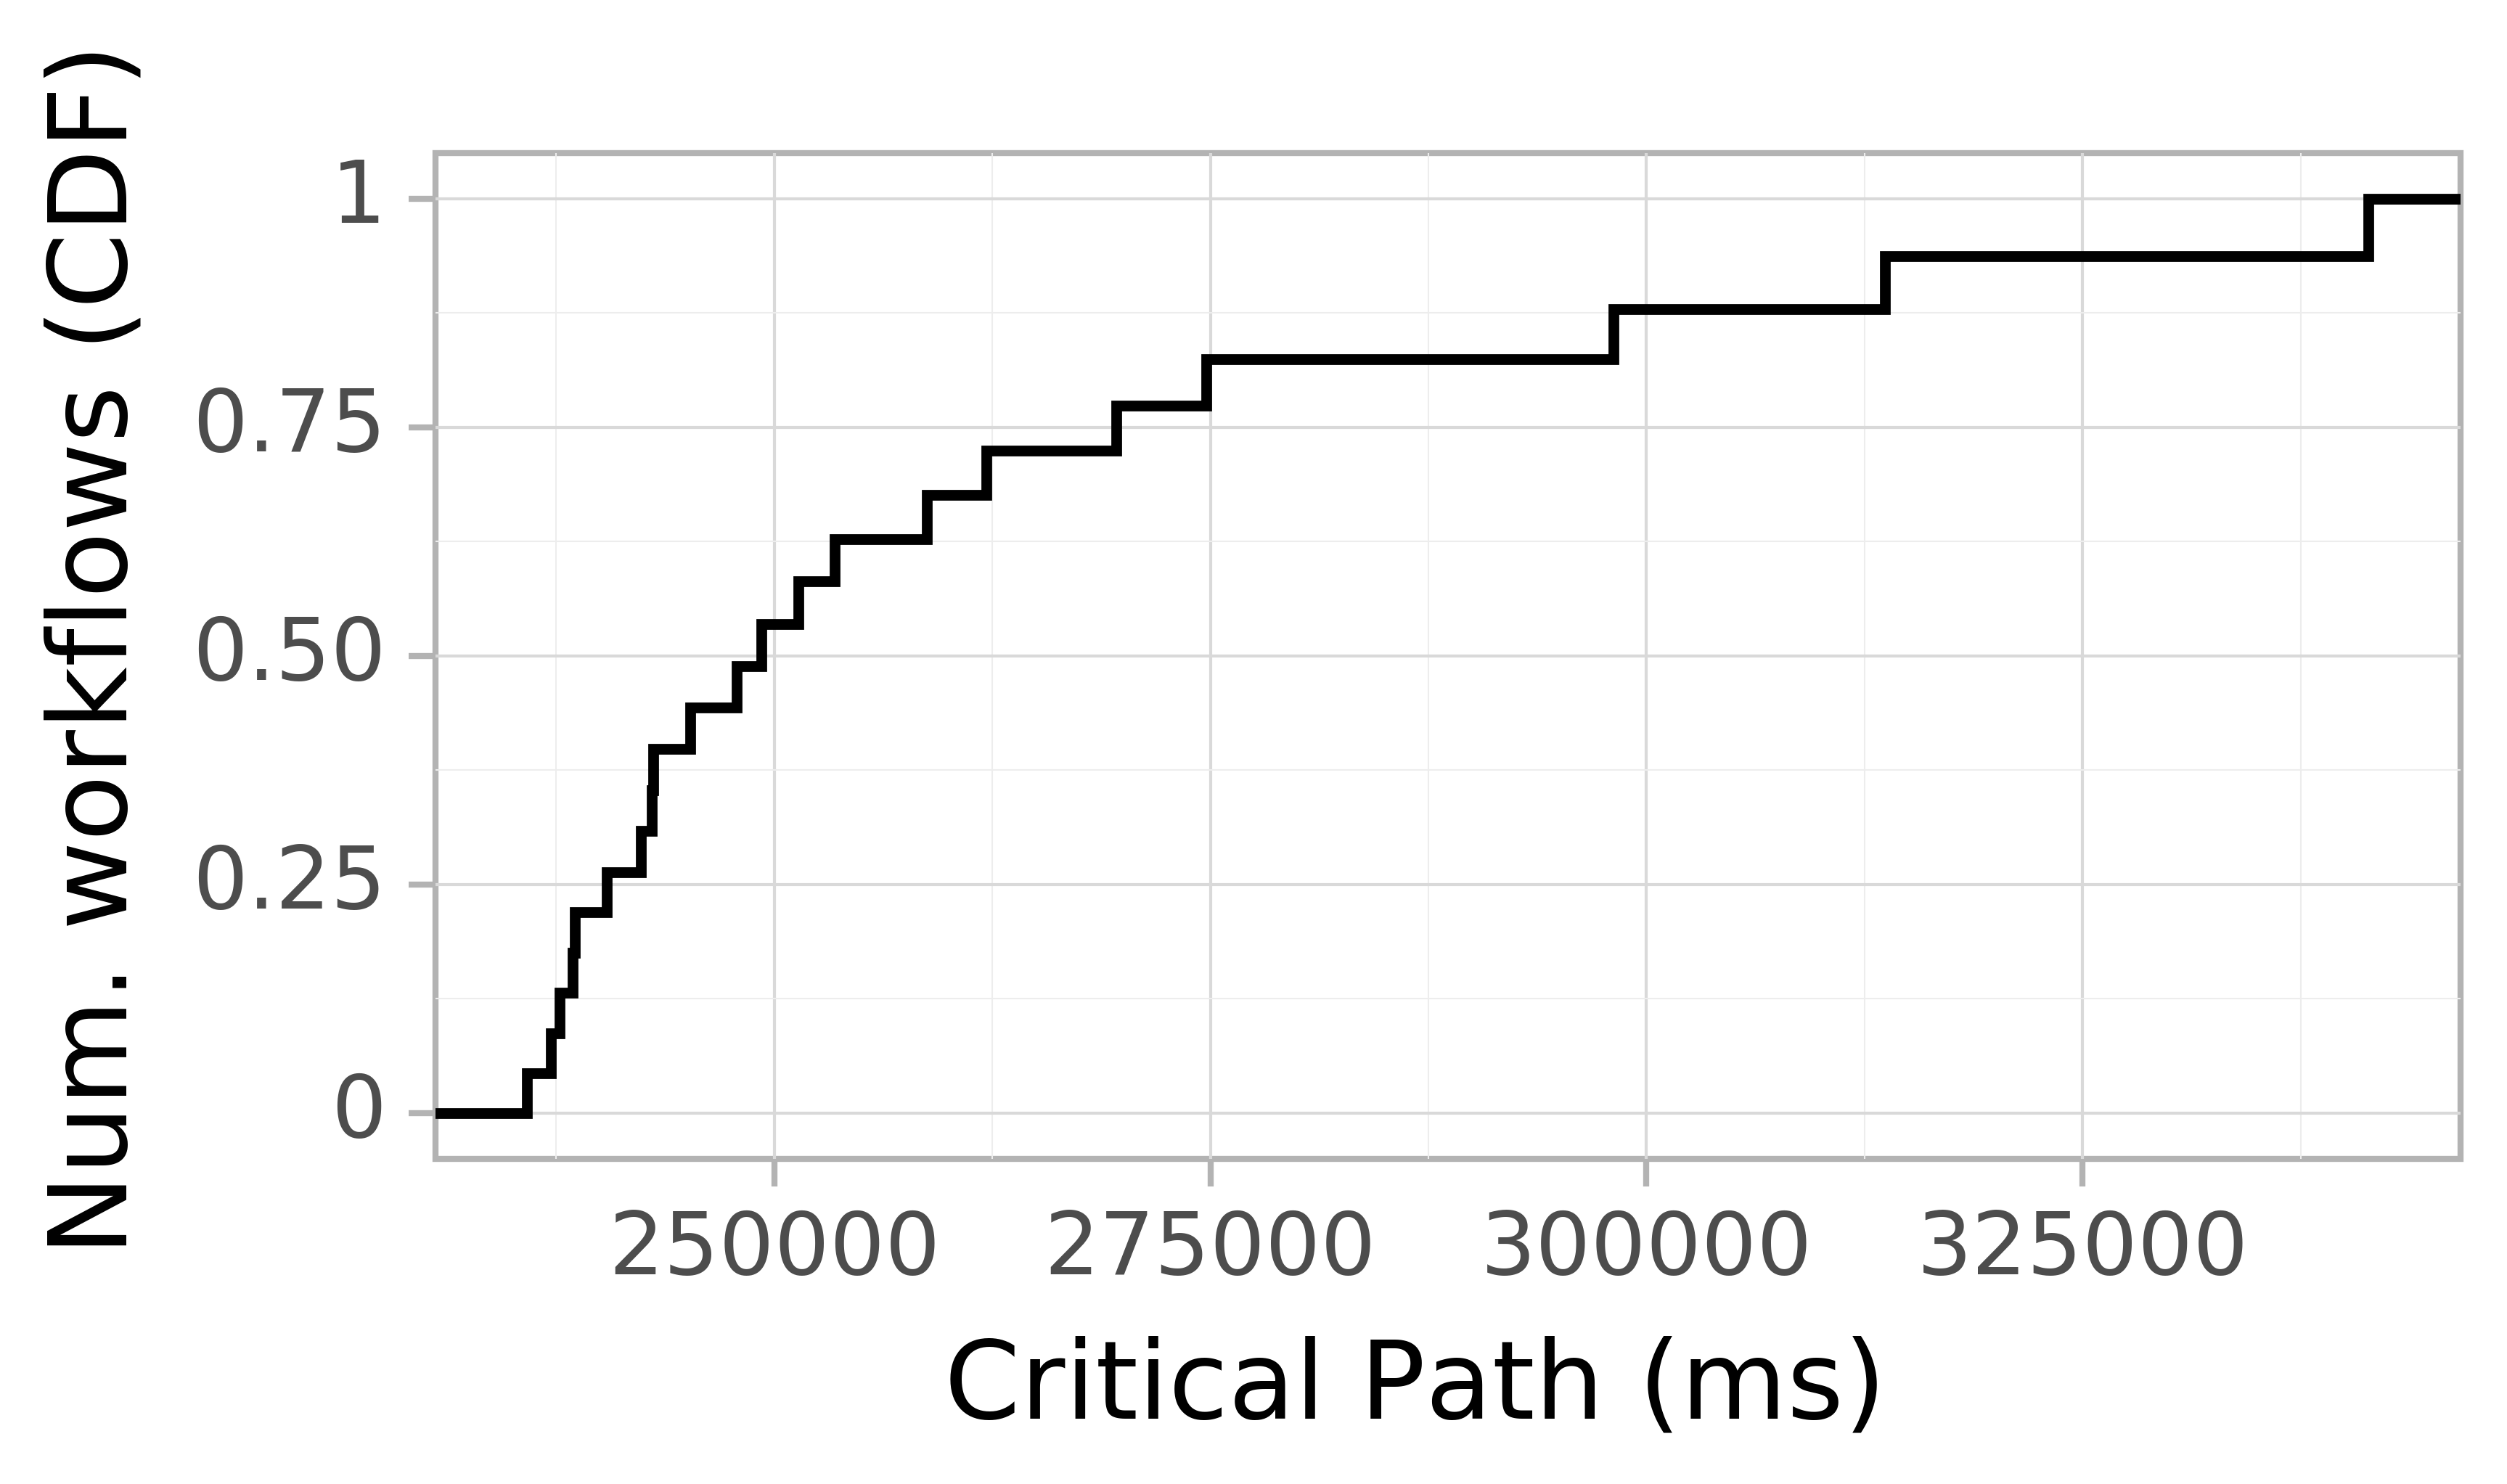 Job runtime CDF graph for the askalon-new_ee51 trace.